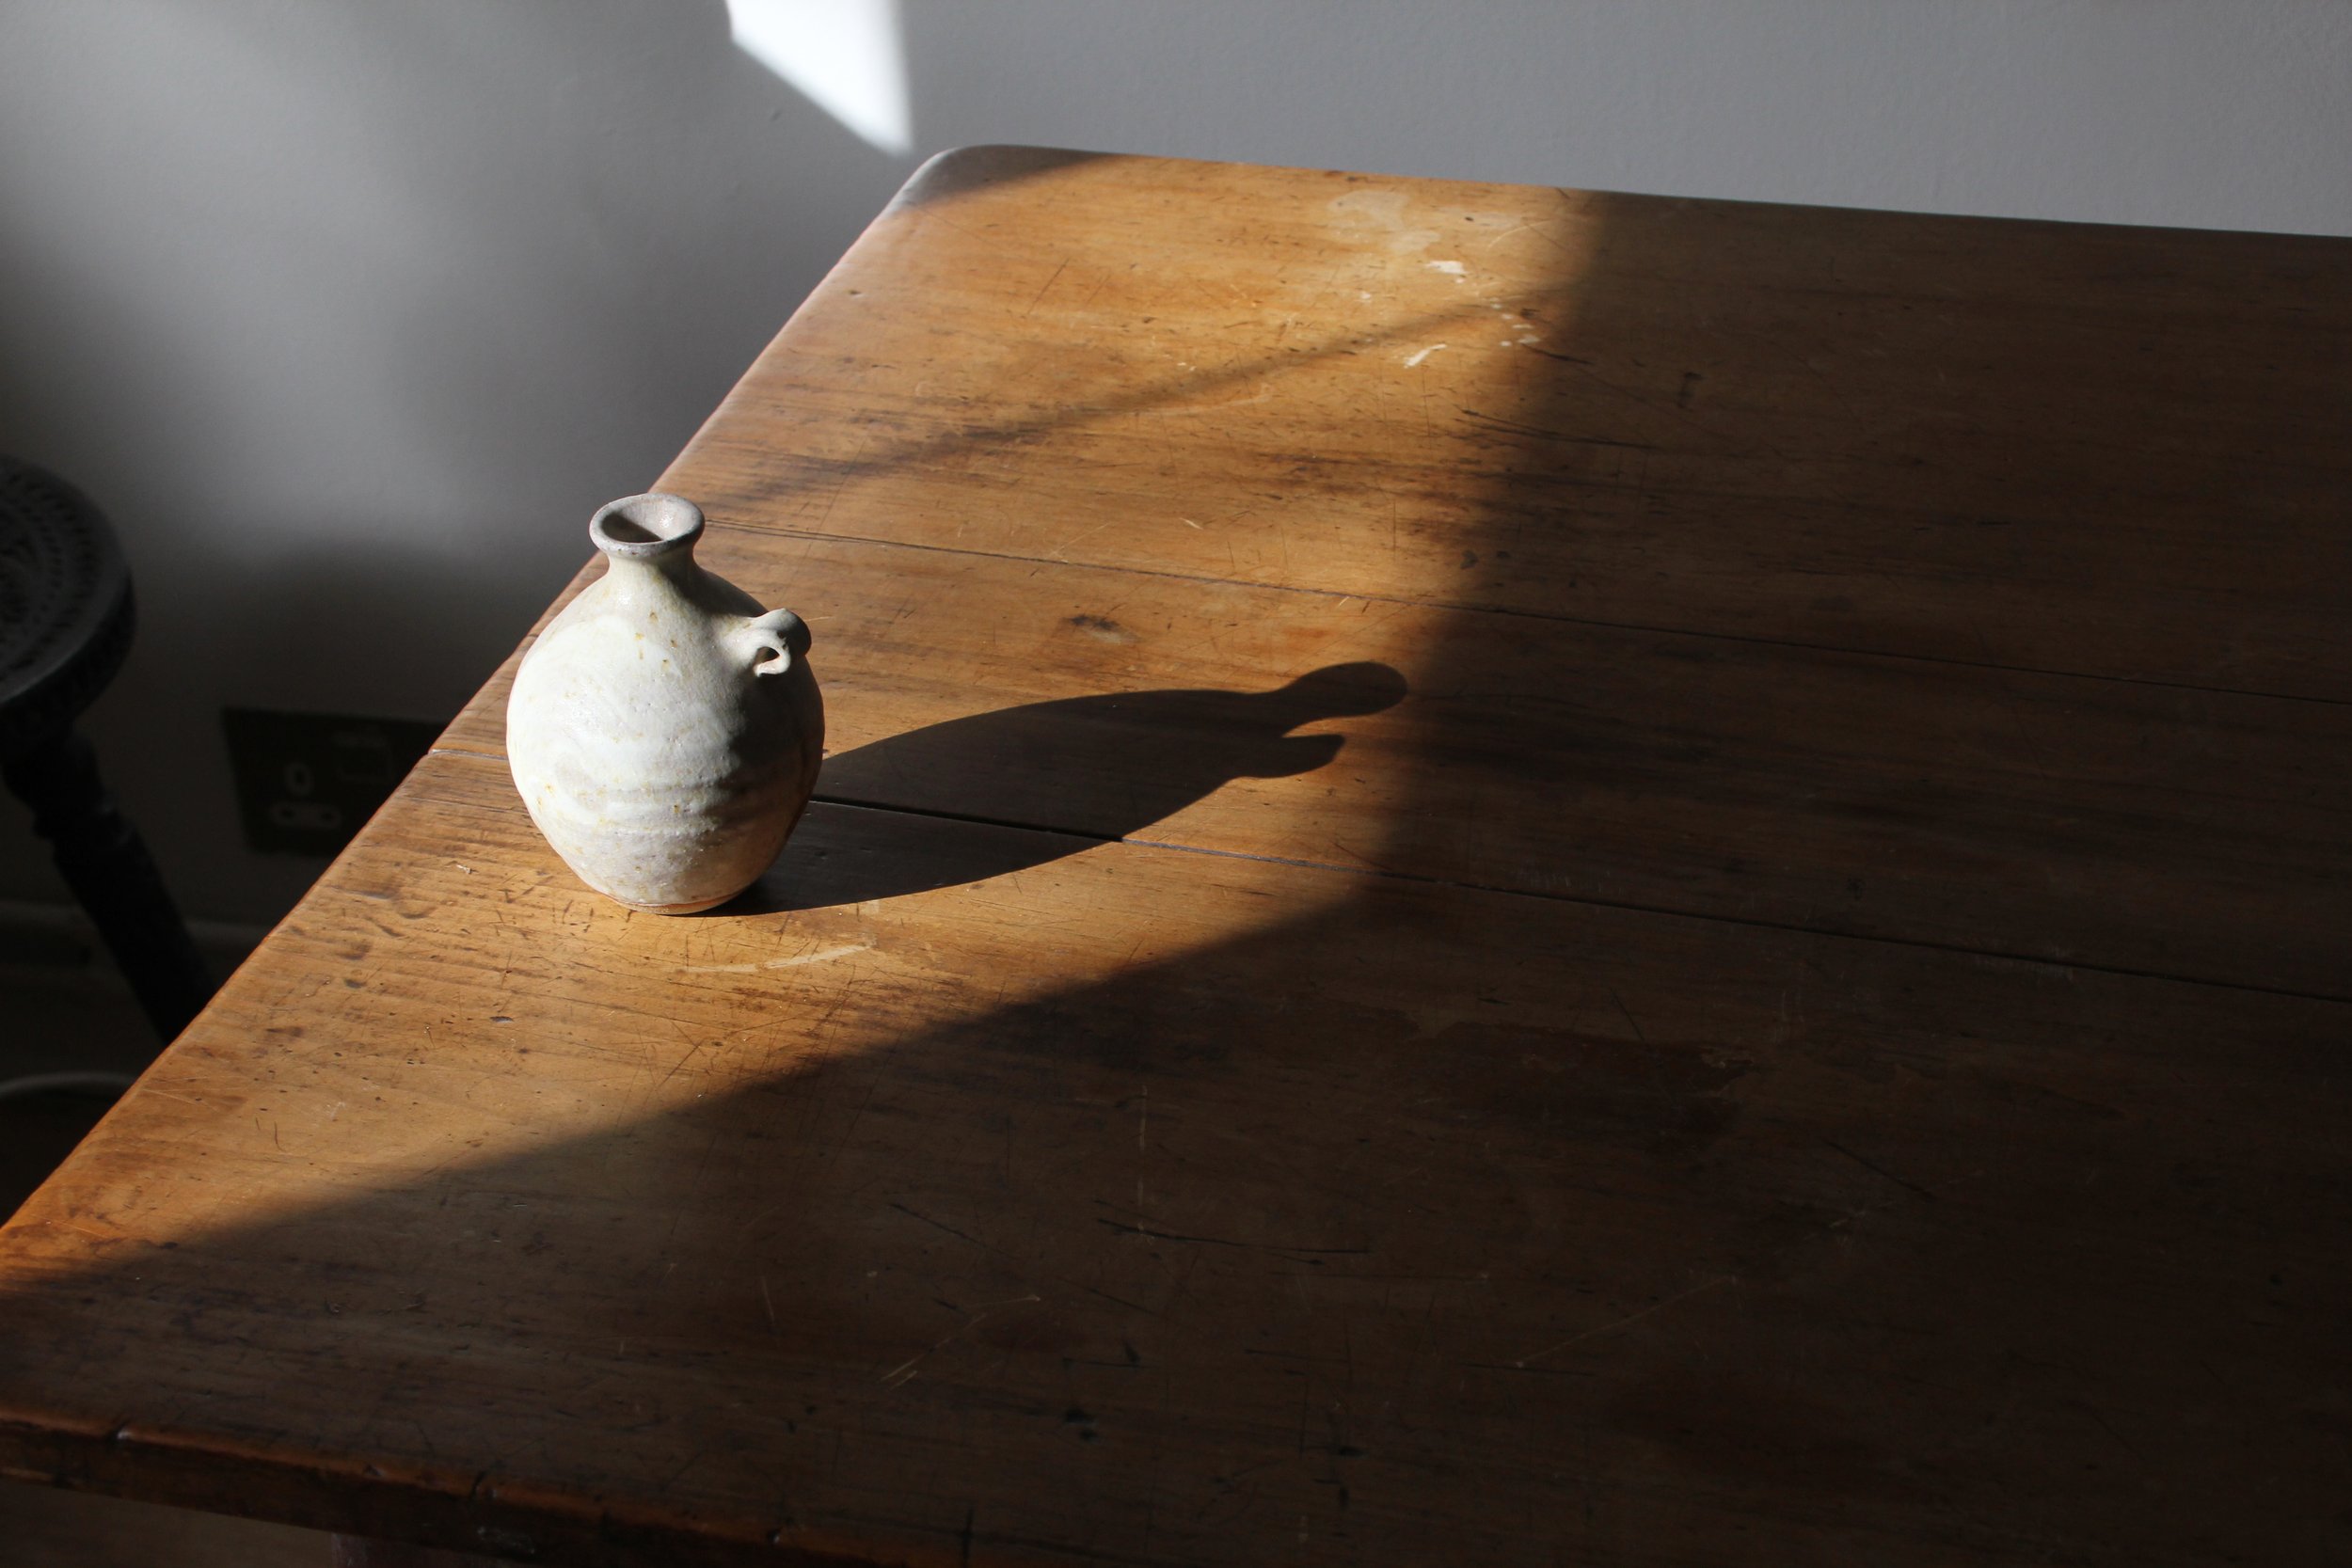 Small handmade pot in the sunlight, by Lily Pearmain